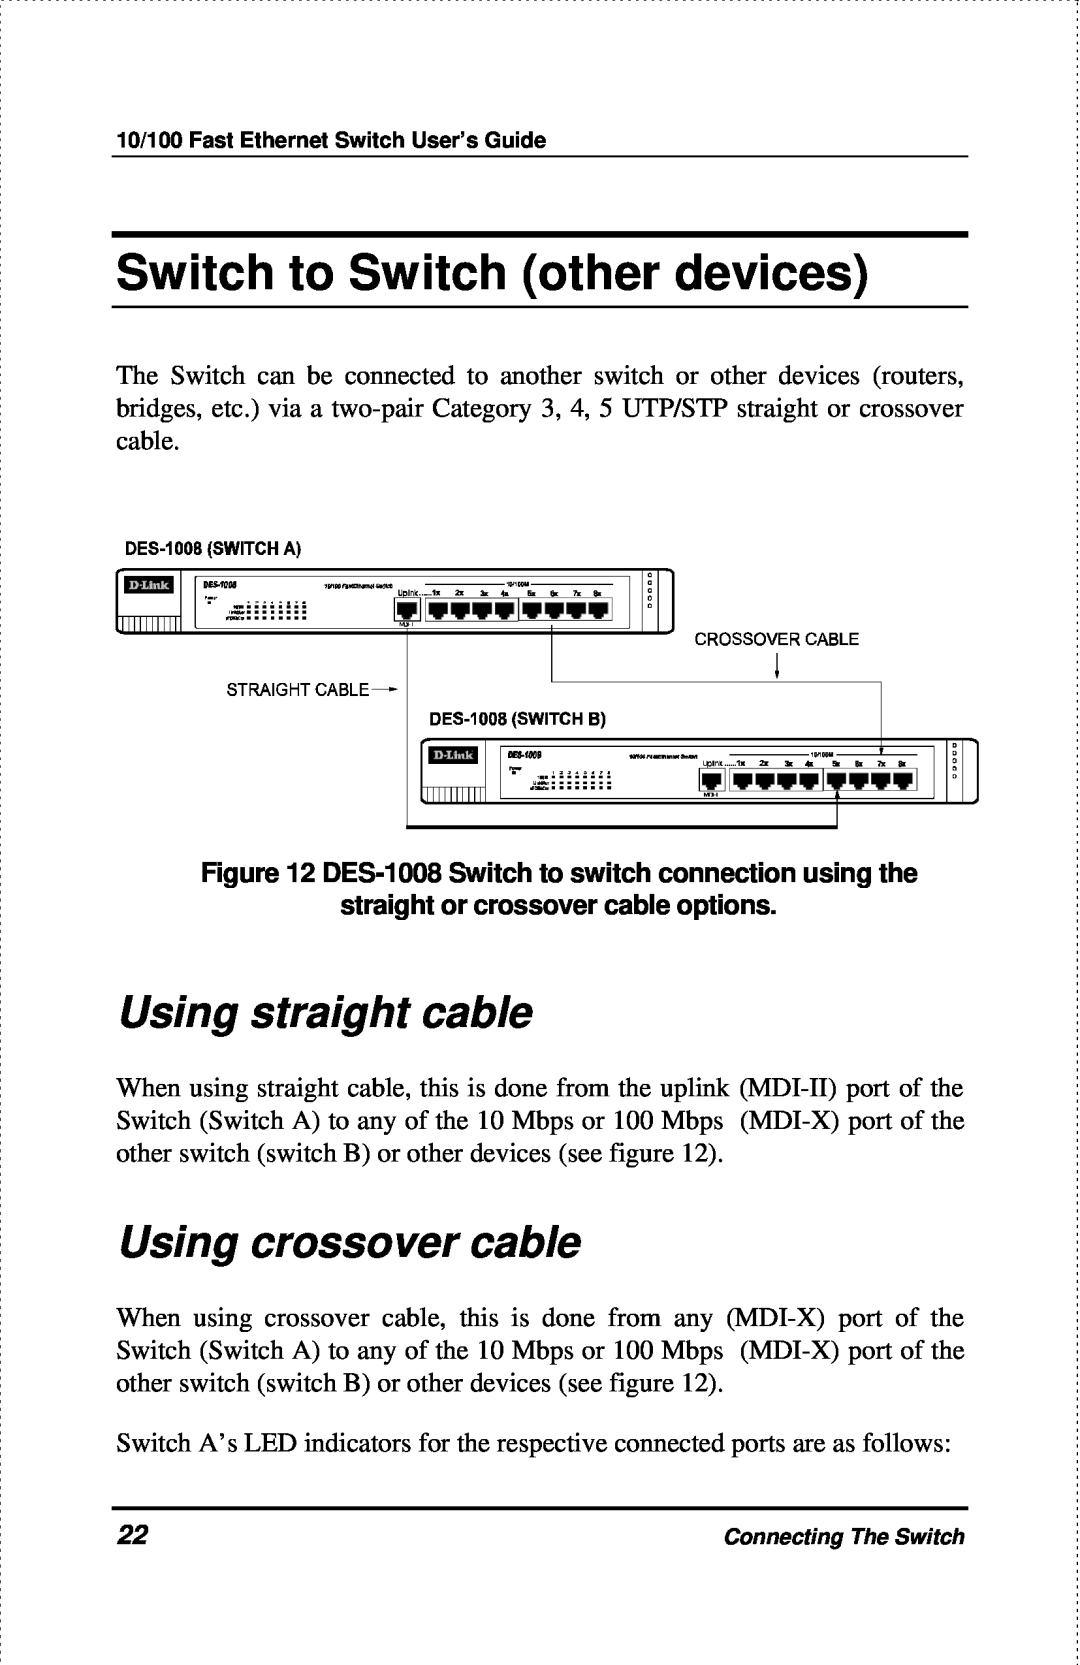 D-Link DES-1004 manual Switch to Switch other devices, Using straight cable, Using crossover cable 